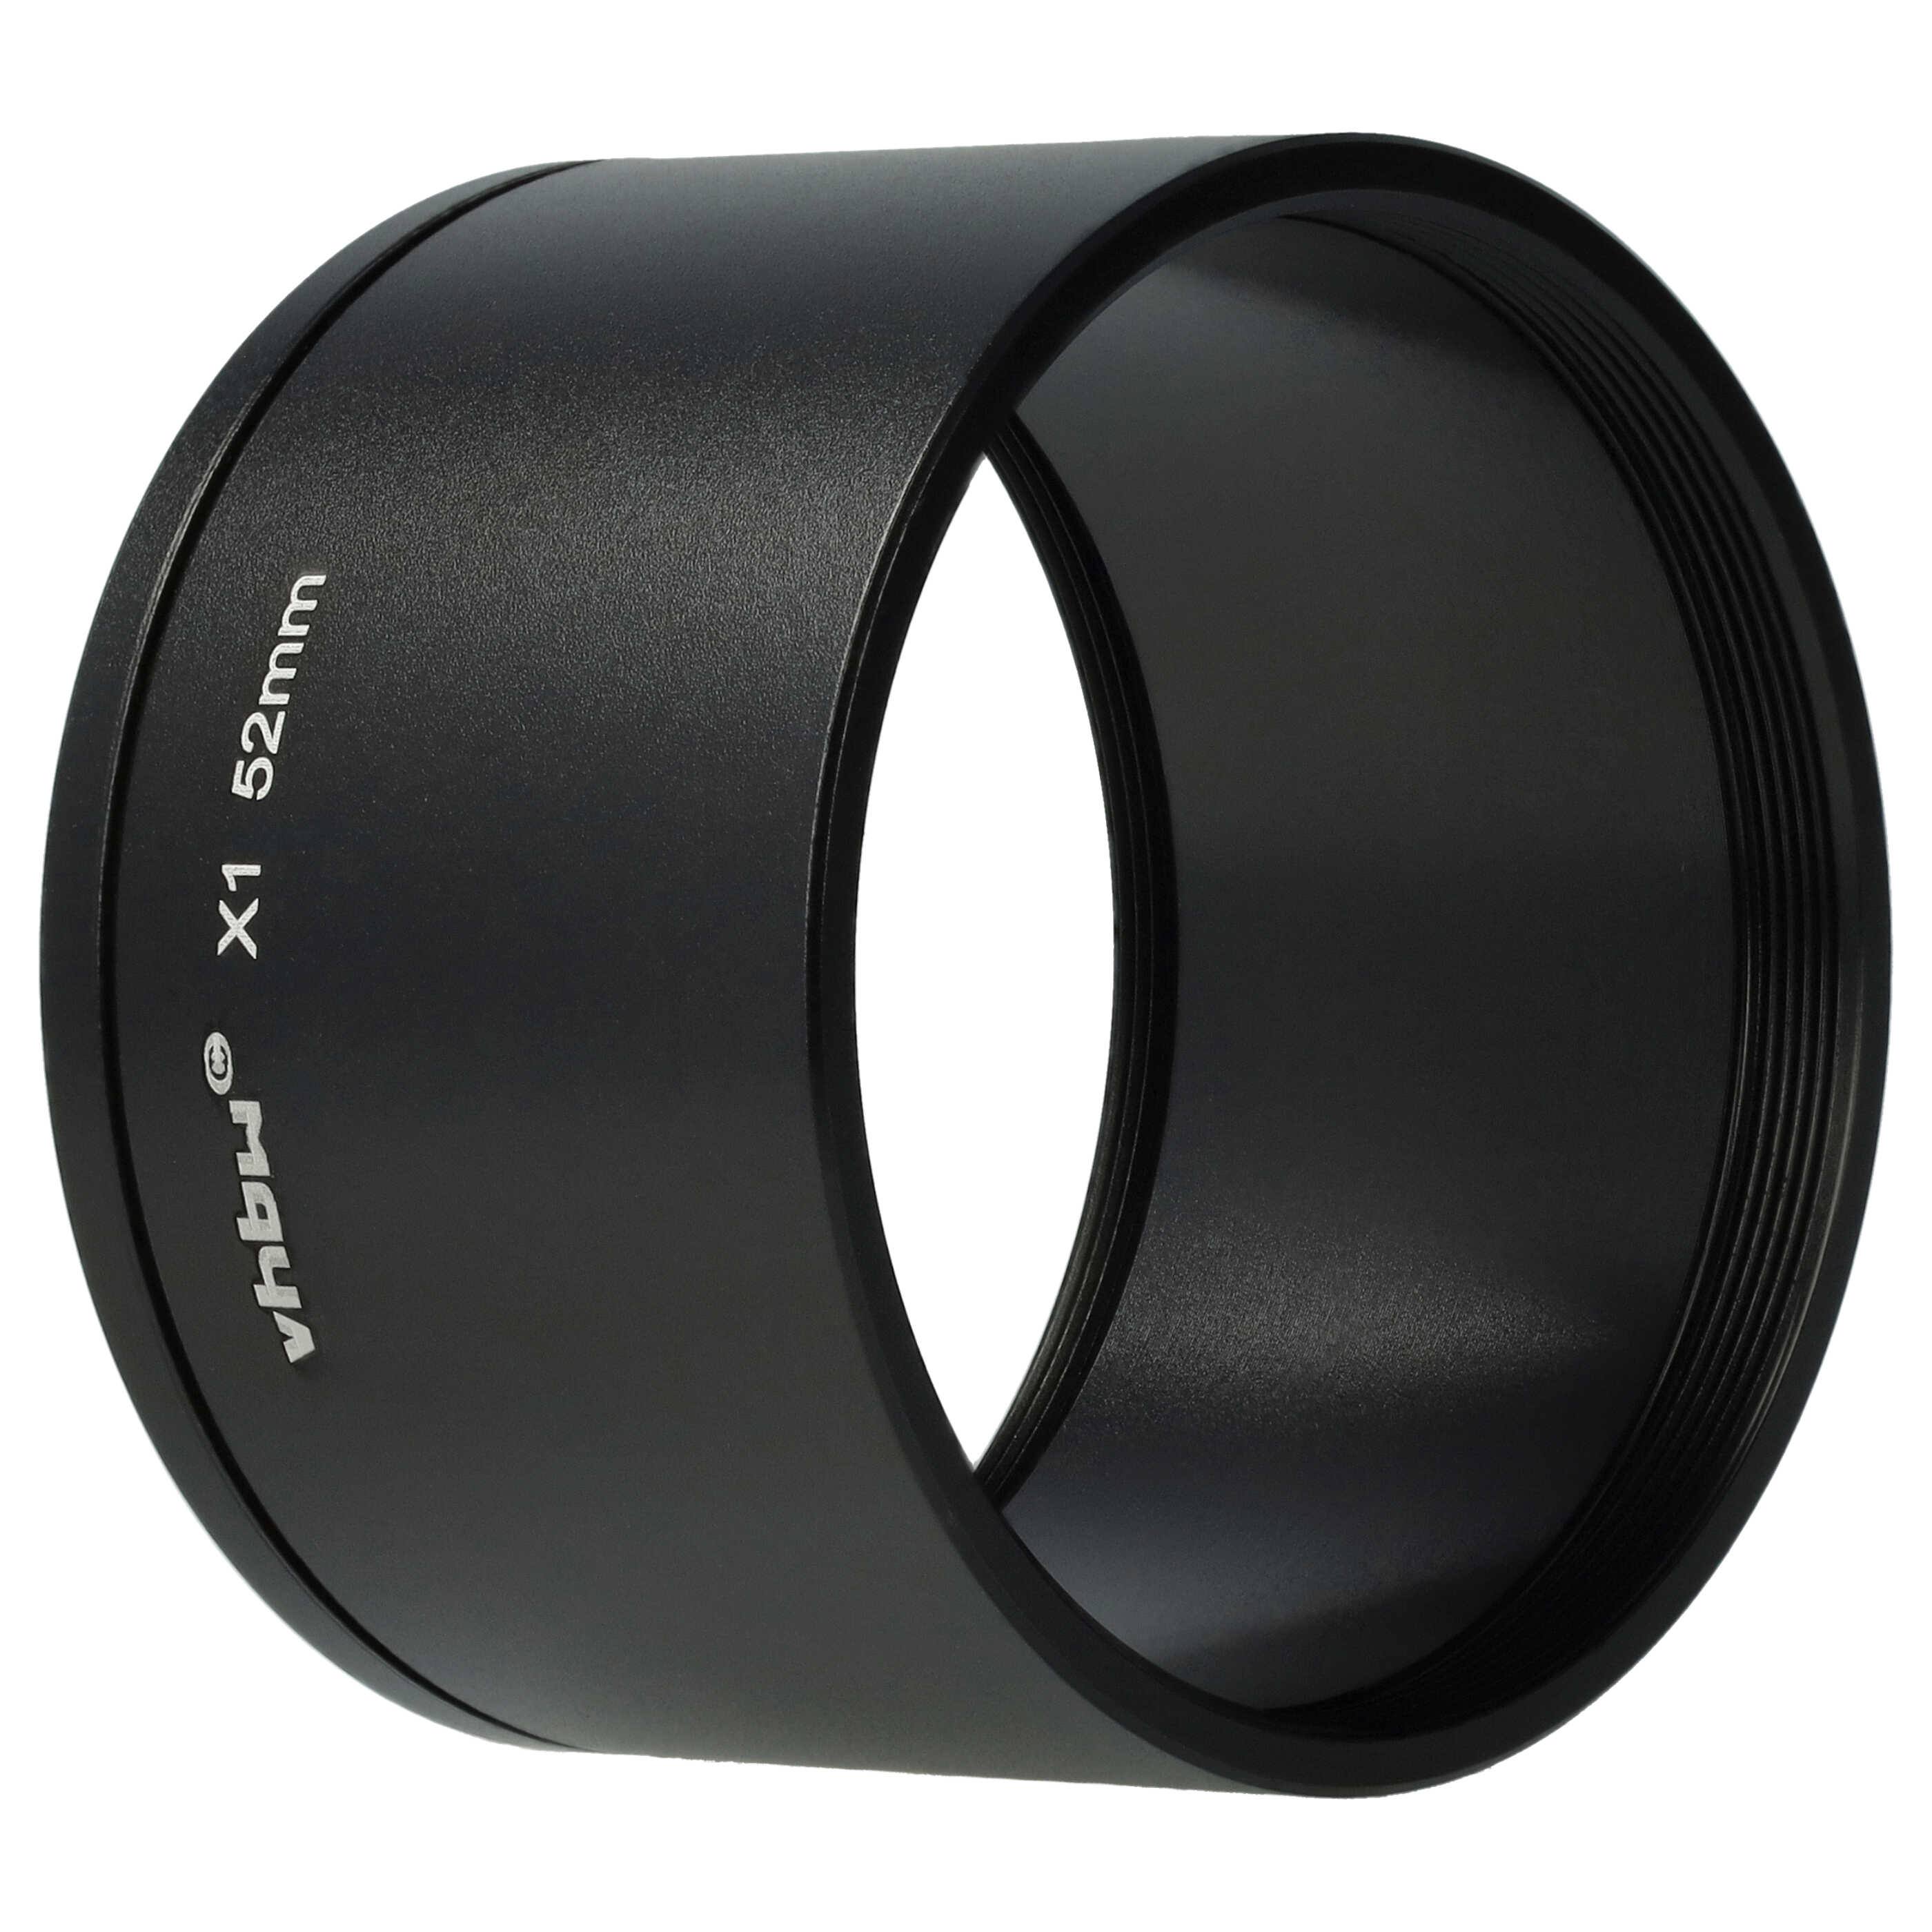 52 mm Filter Adapter suitable for Leica X1, X2 Camera Lens